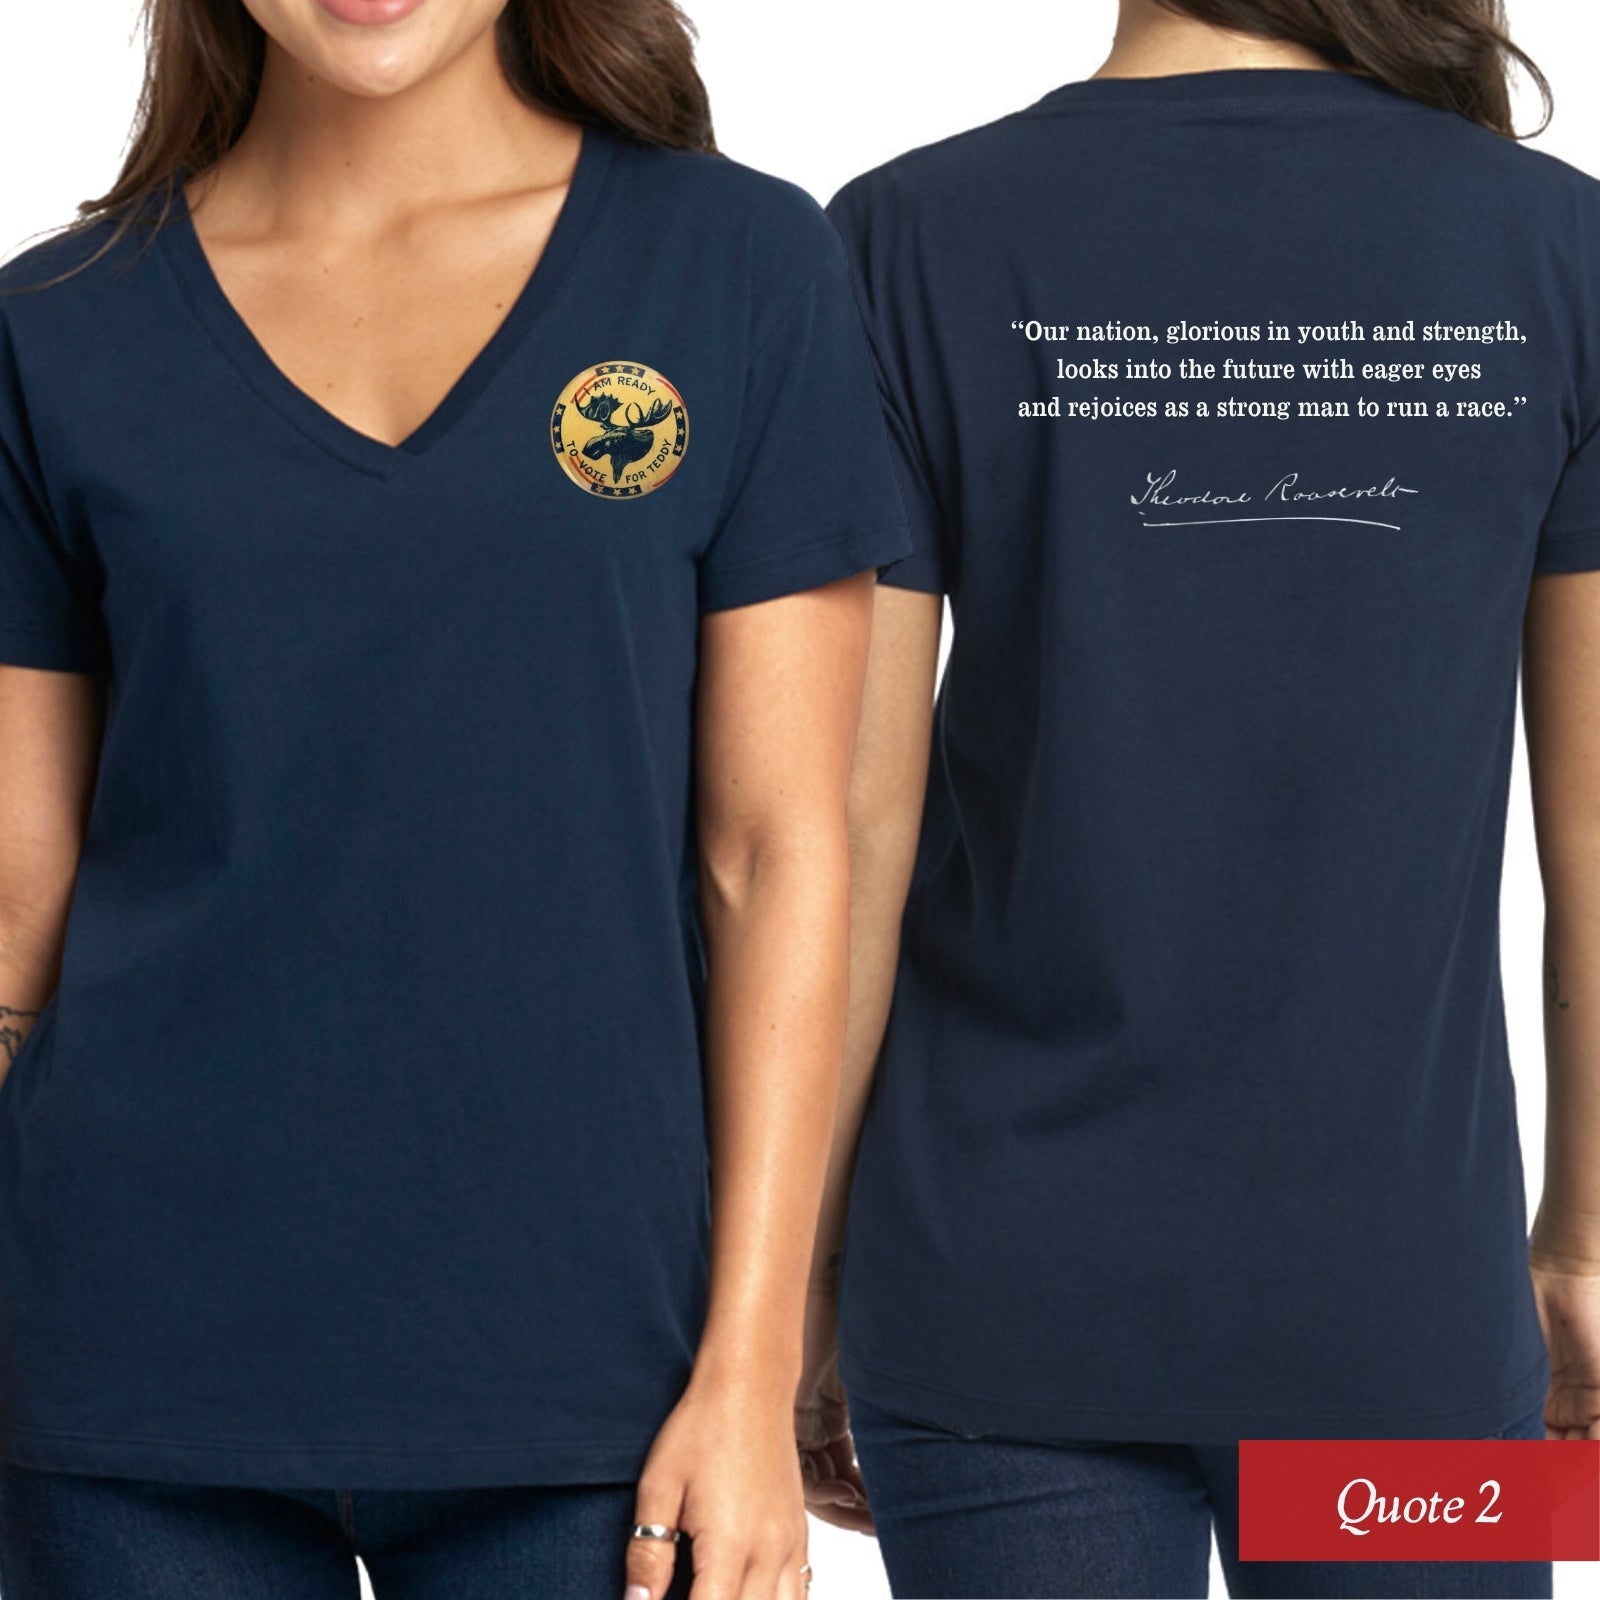 Quote 2 of the Teddy Roosevelt “I’m ready to vote for Teddy” presidential campaign Women's v-neck shirt from The History List store